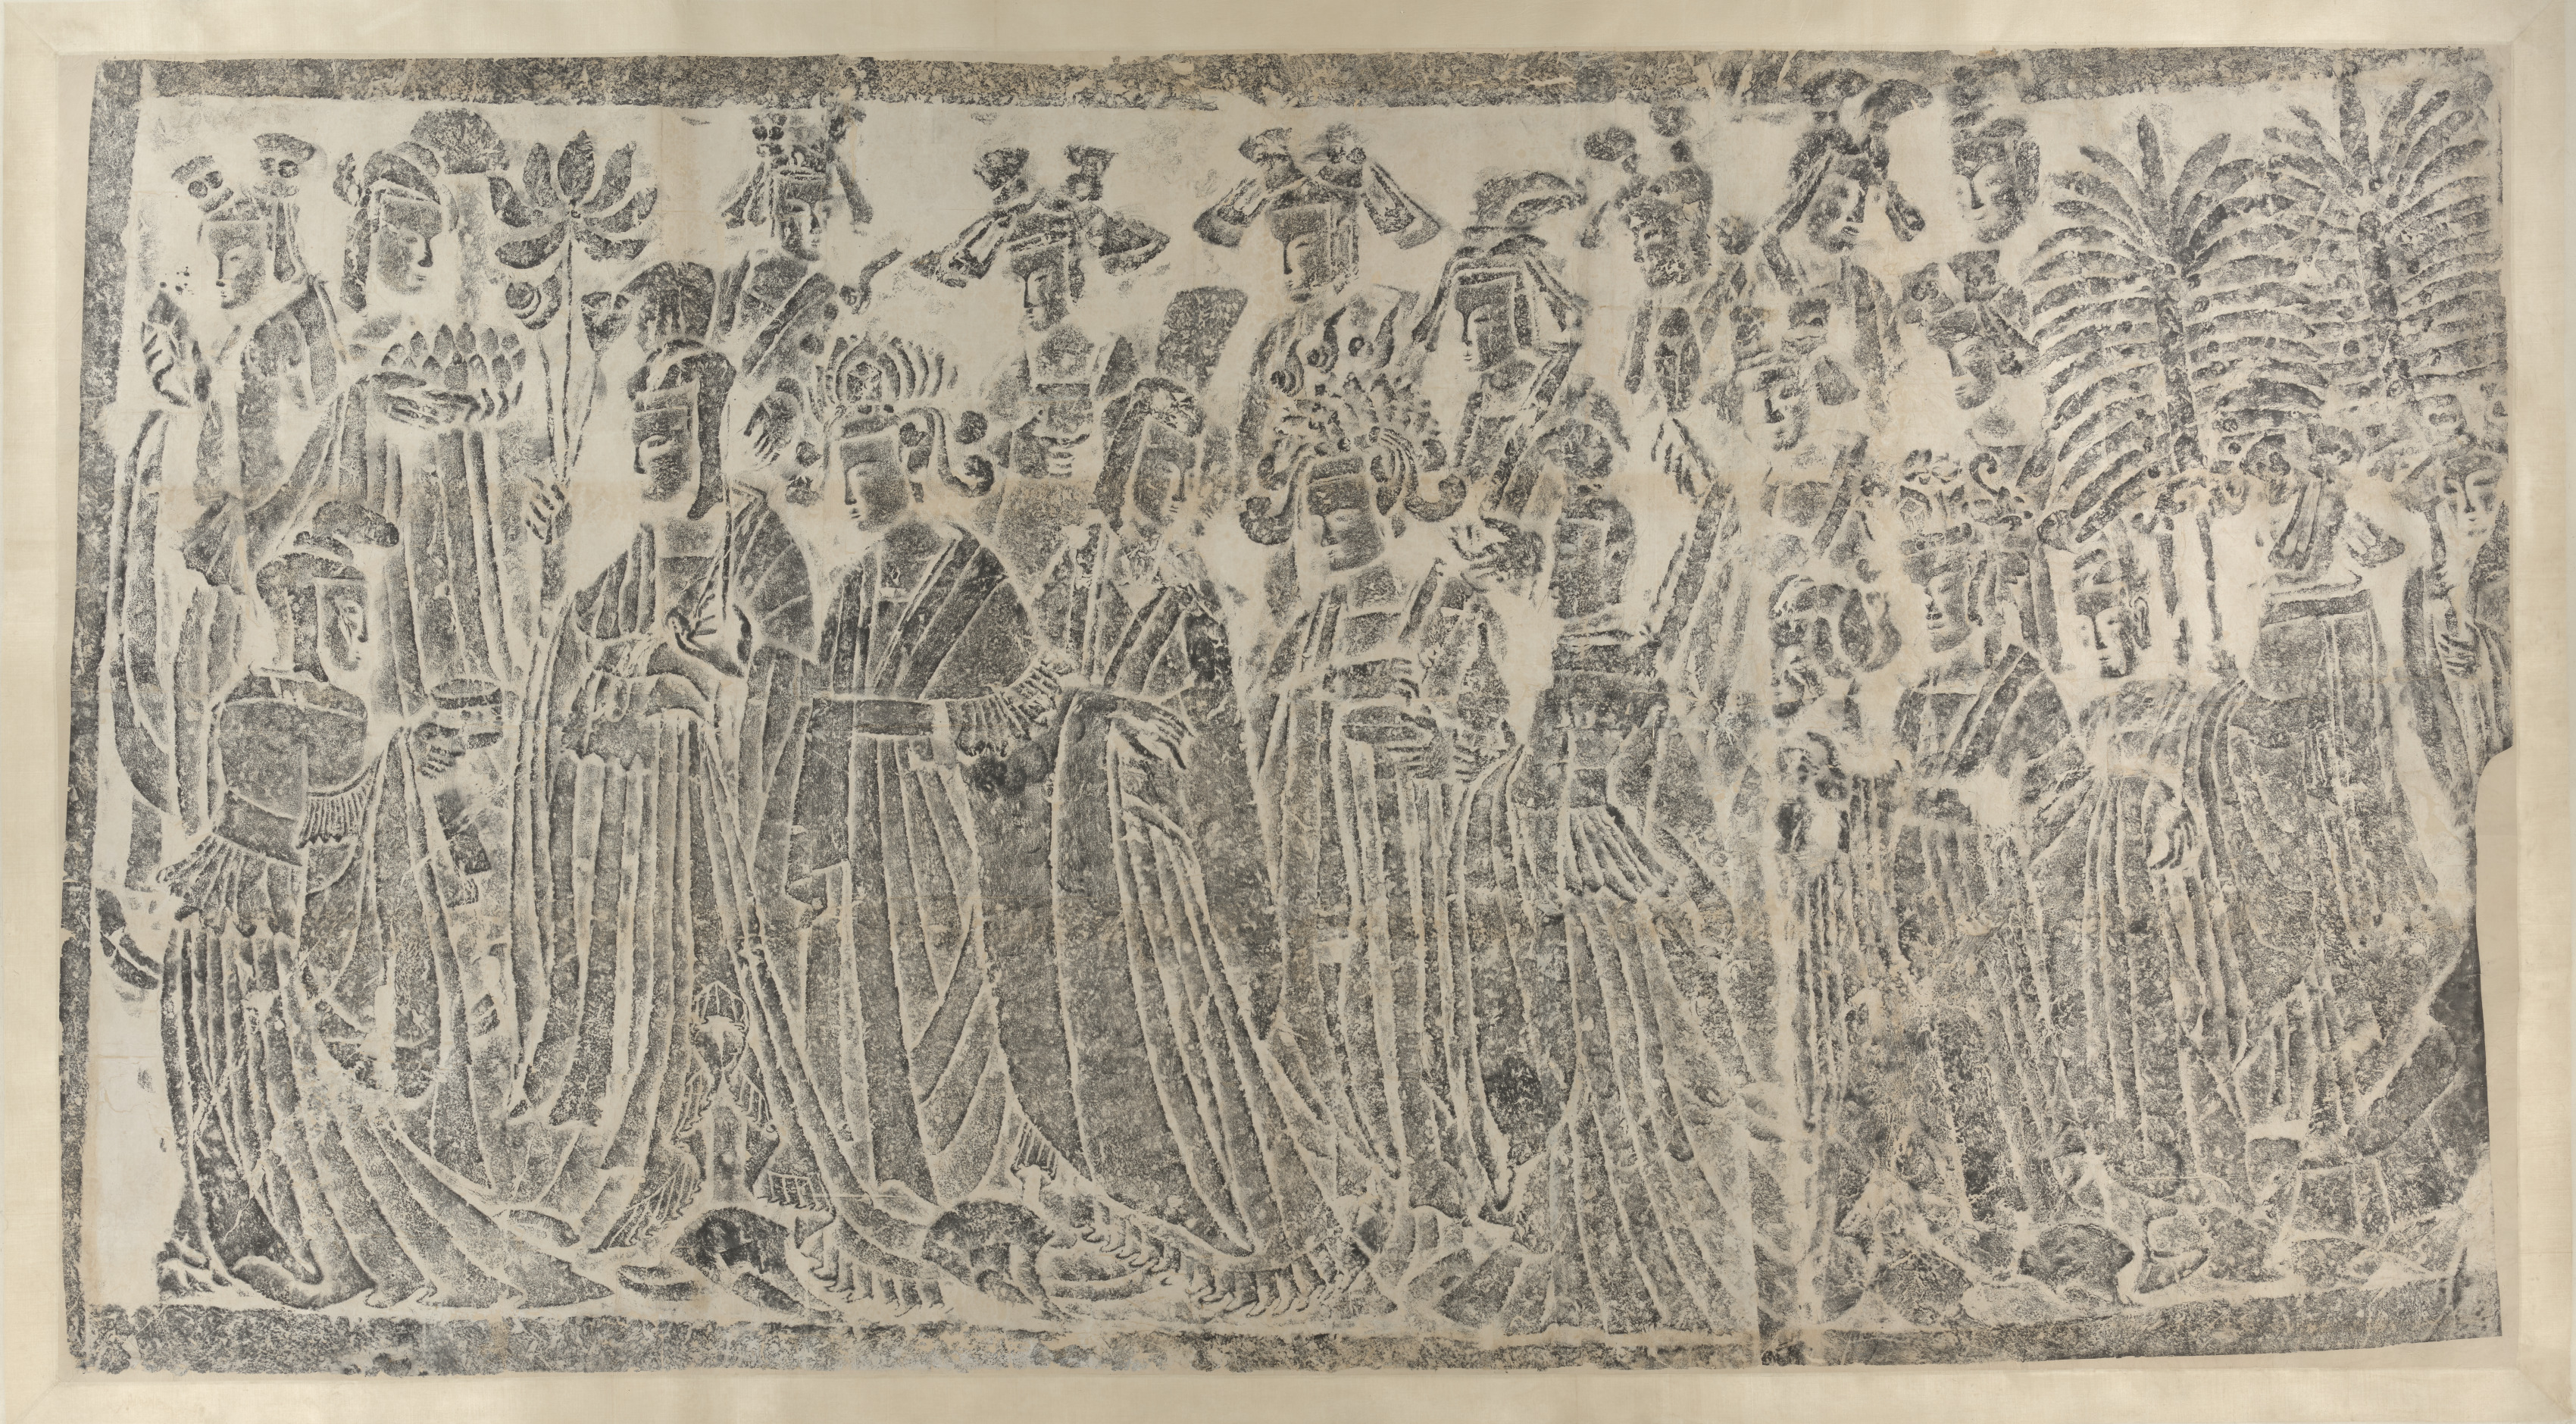 Rubbing of Imperial Procession with Empress, taken from Northern Wei dynasty (386-534) Central Binyang Cave, Longmen, Henan Province